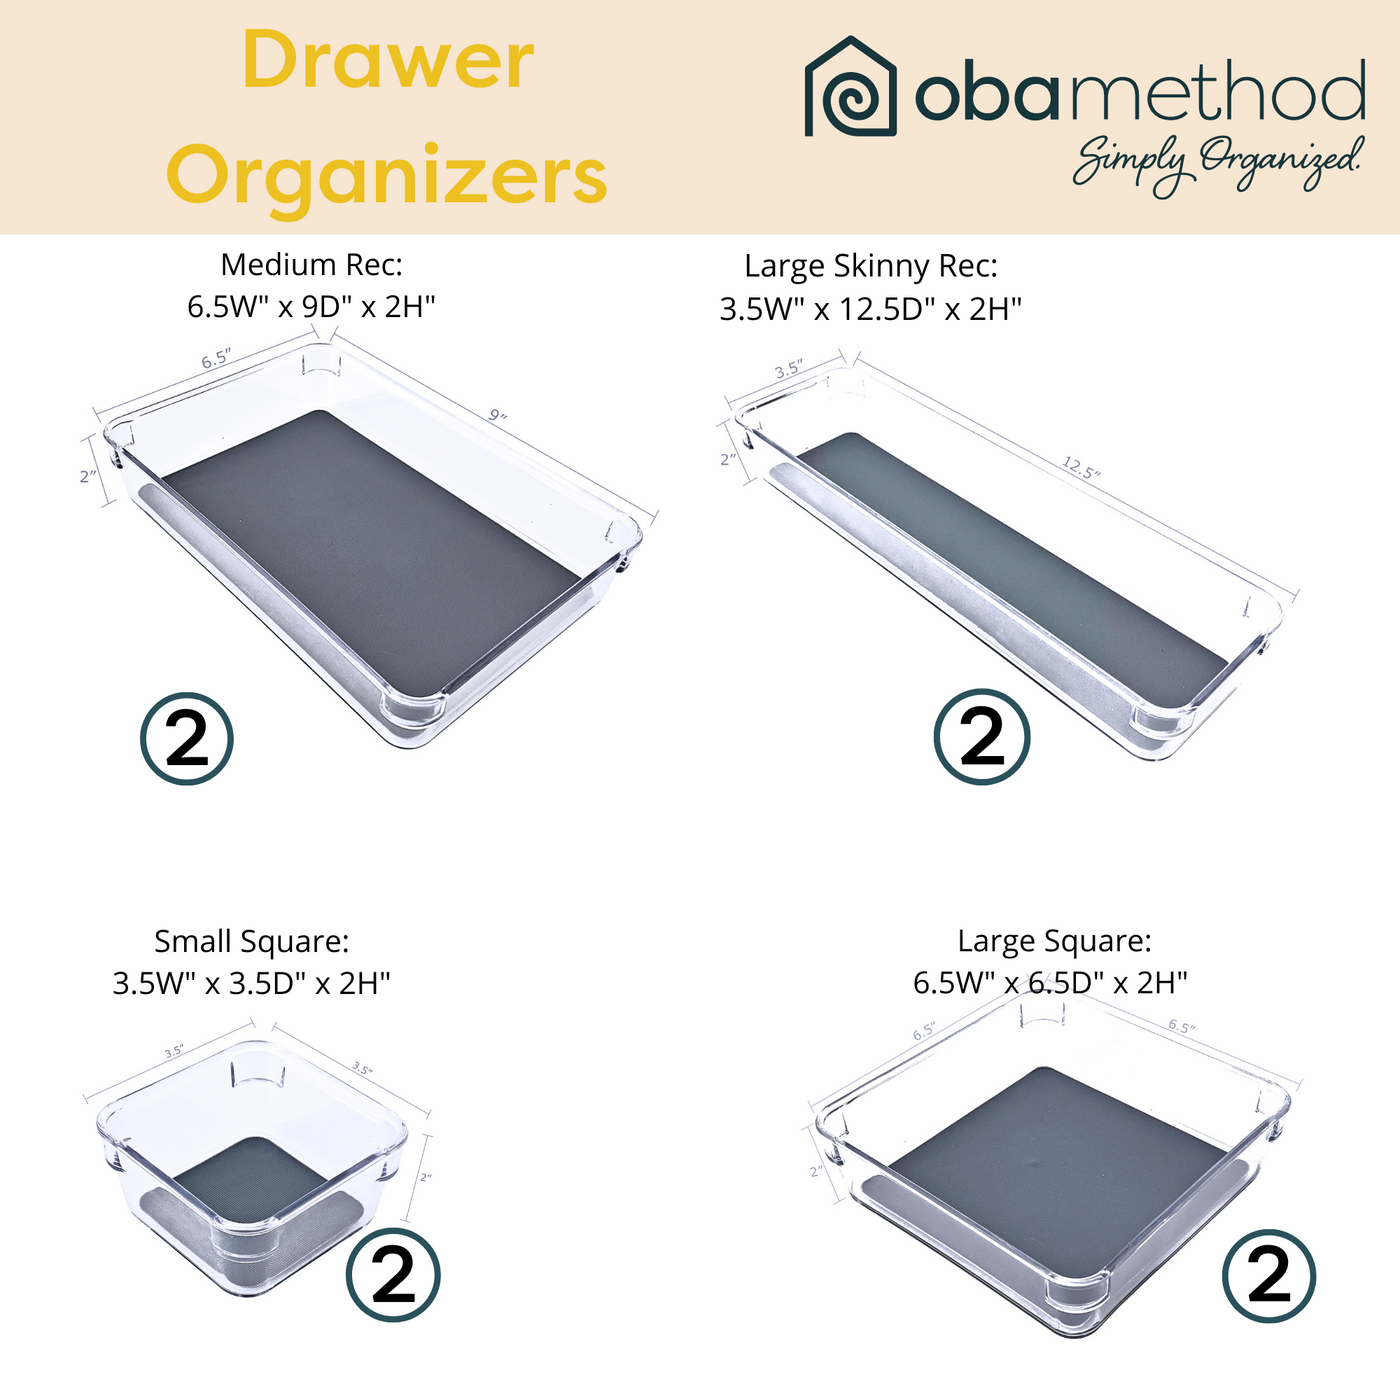 Drawers organizers dimensions and quantity